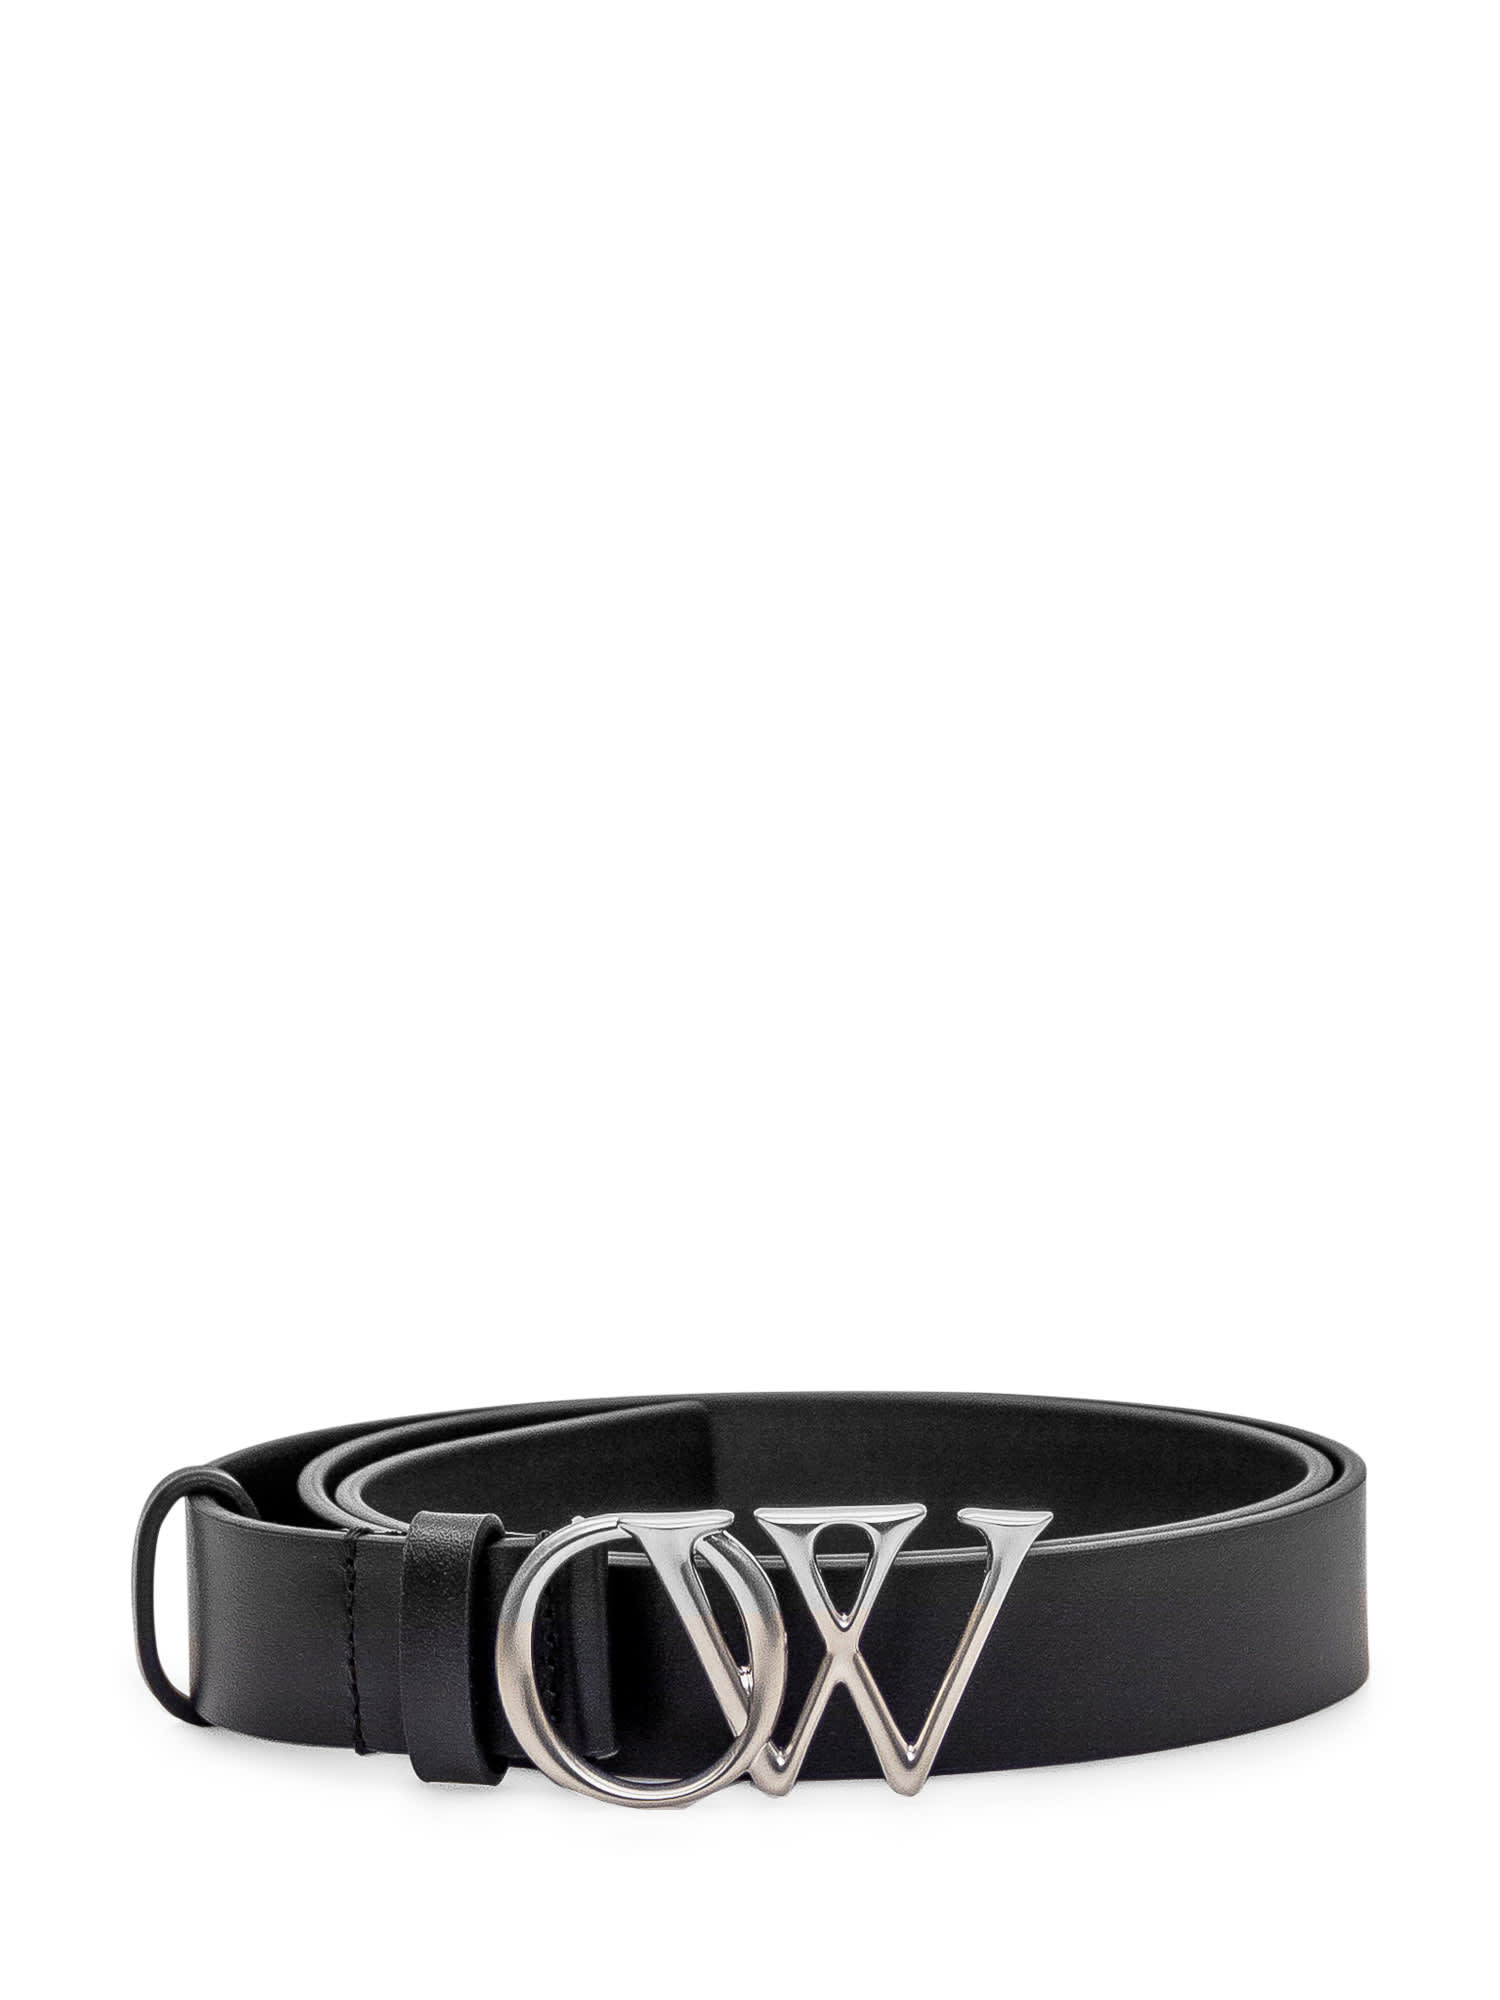 Off-white Ow-buckle Leather Belt In Black